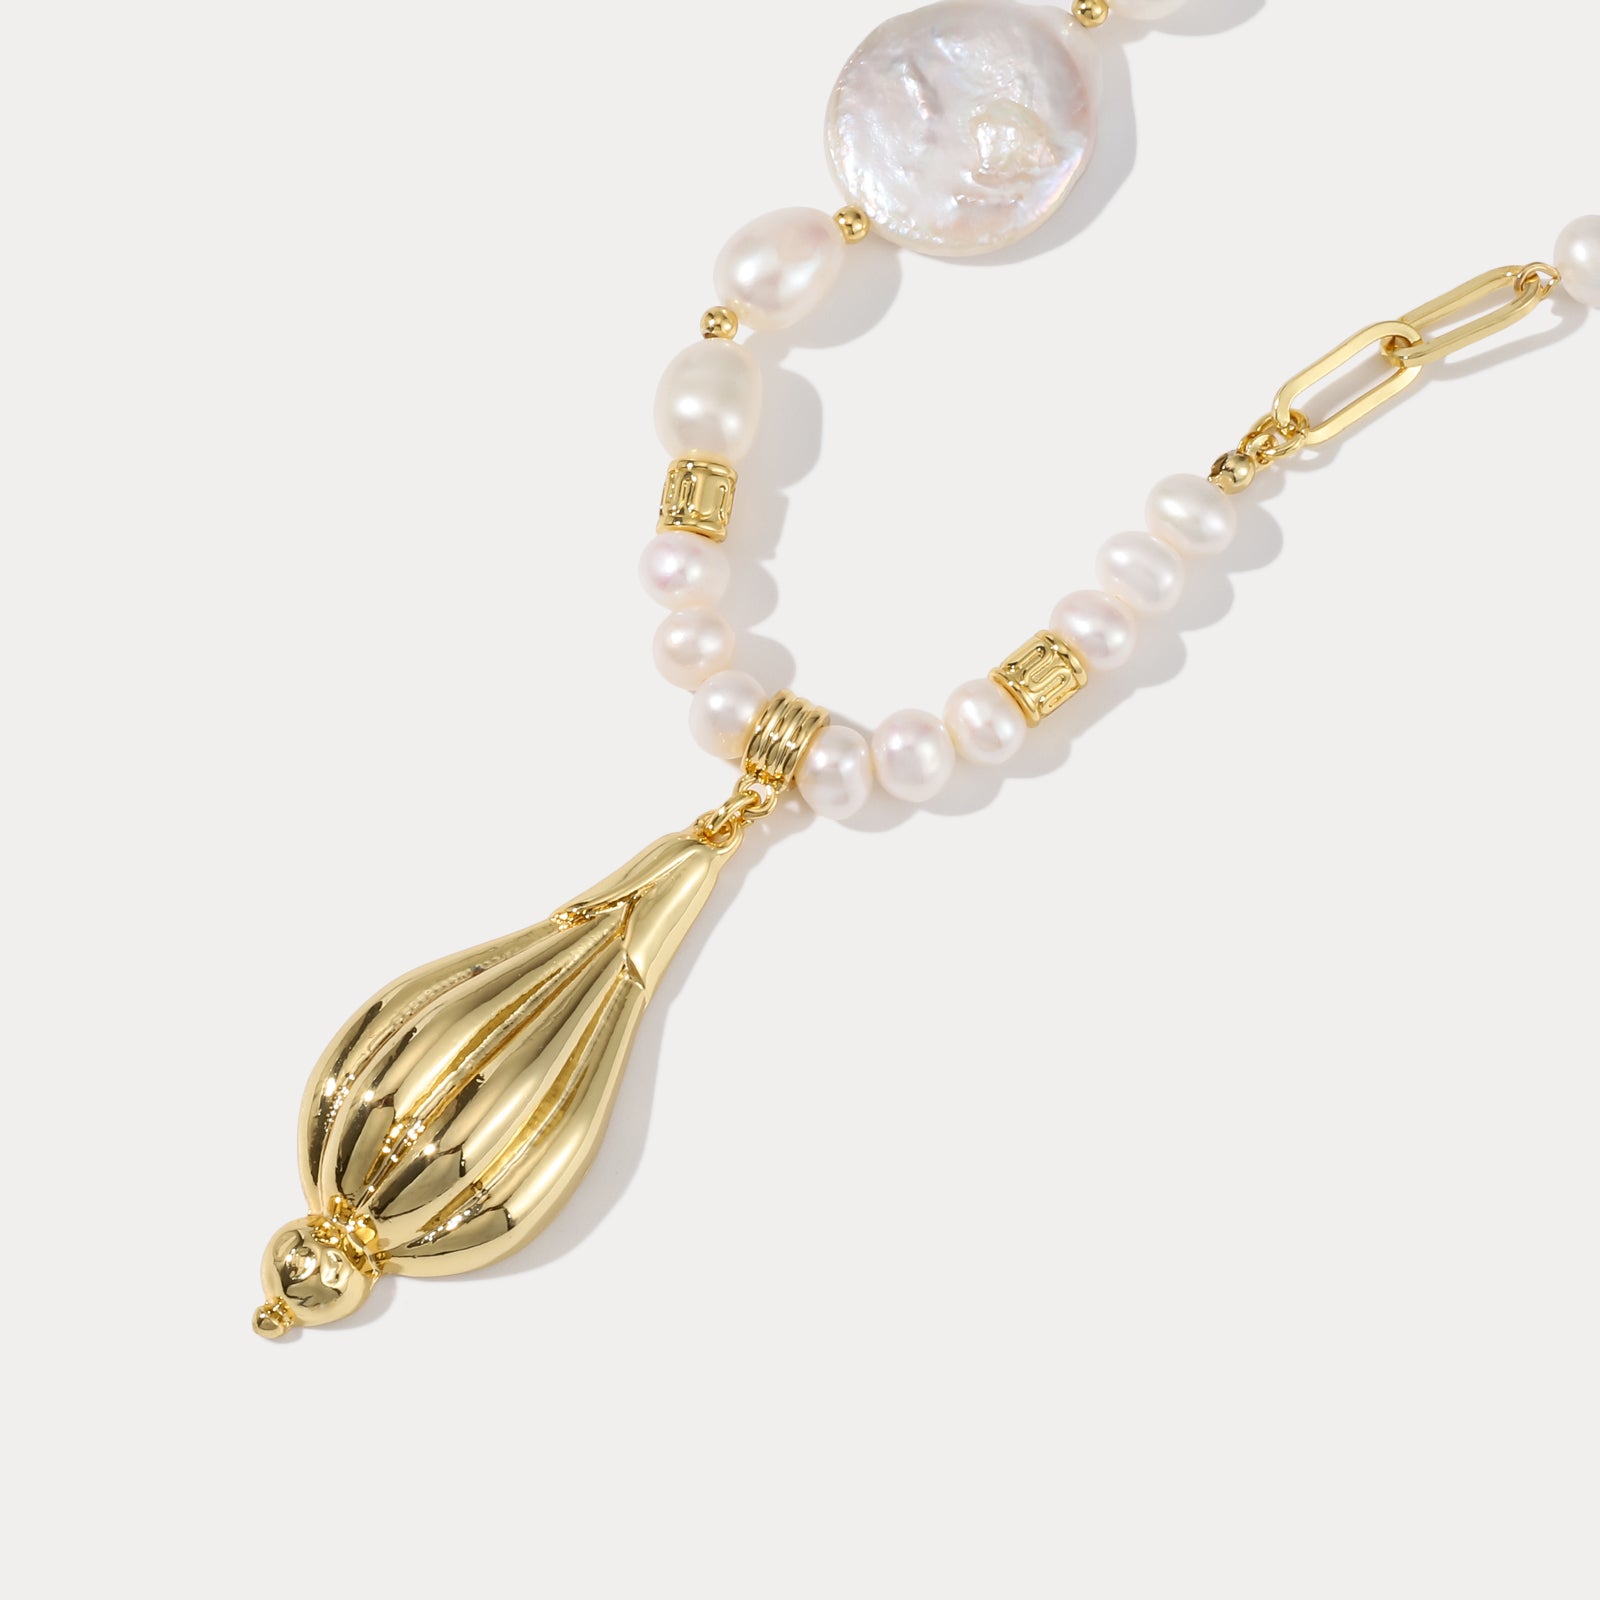 Baroque Daisy Bud Pearl Gold Necklace